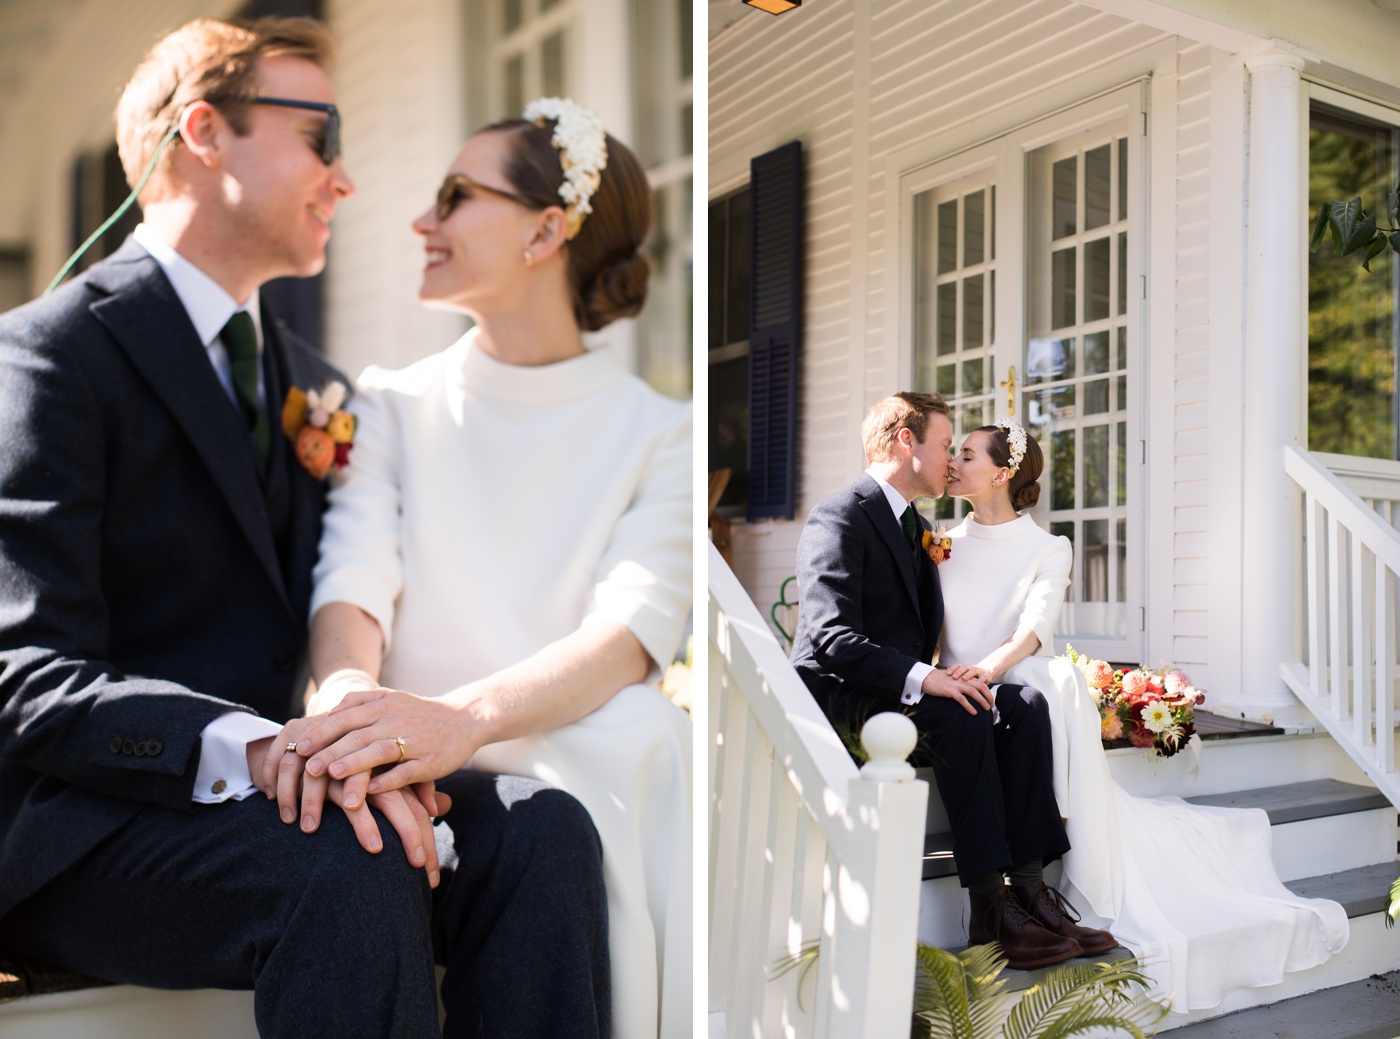 Bridal portraits at a private residence in Sugar Hill, NH